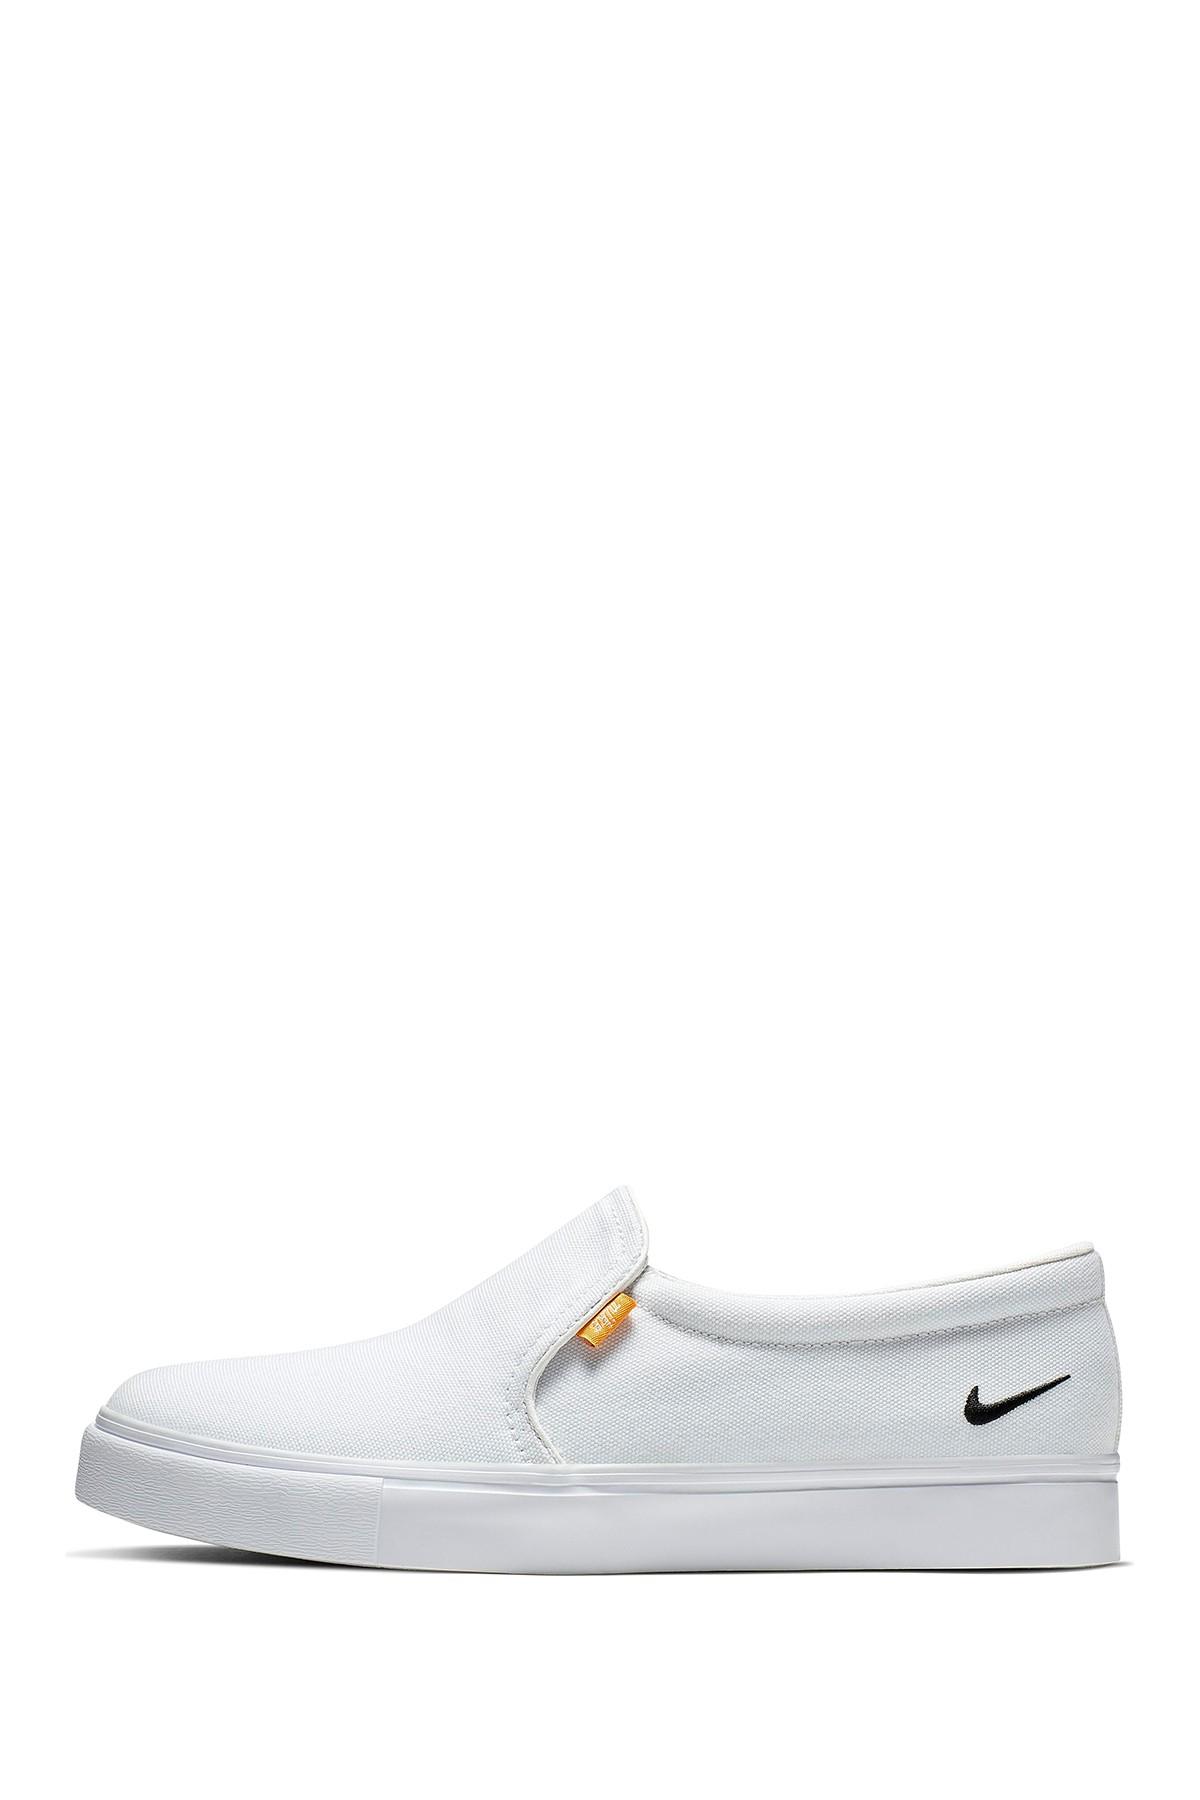 Nike Court Royale Ac Slip On in White - Lyst